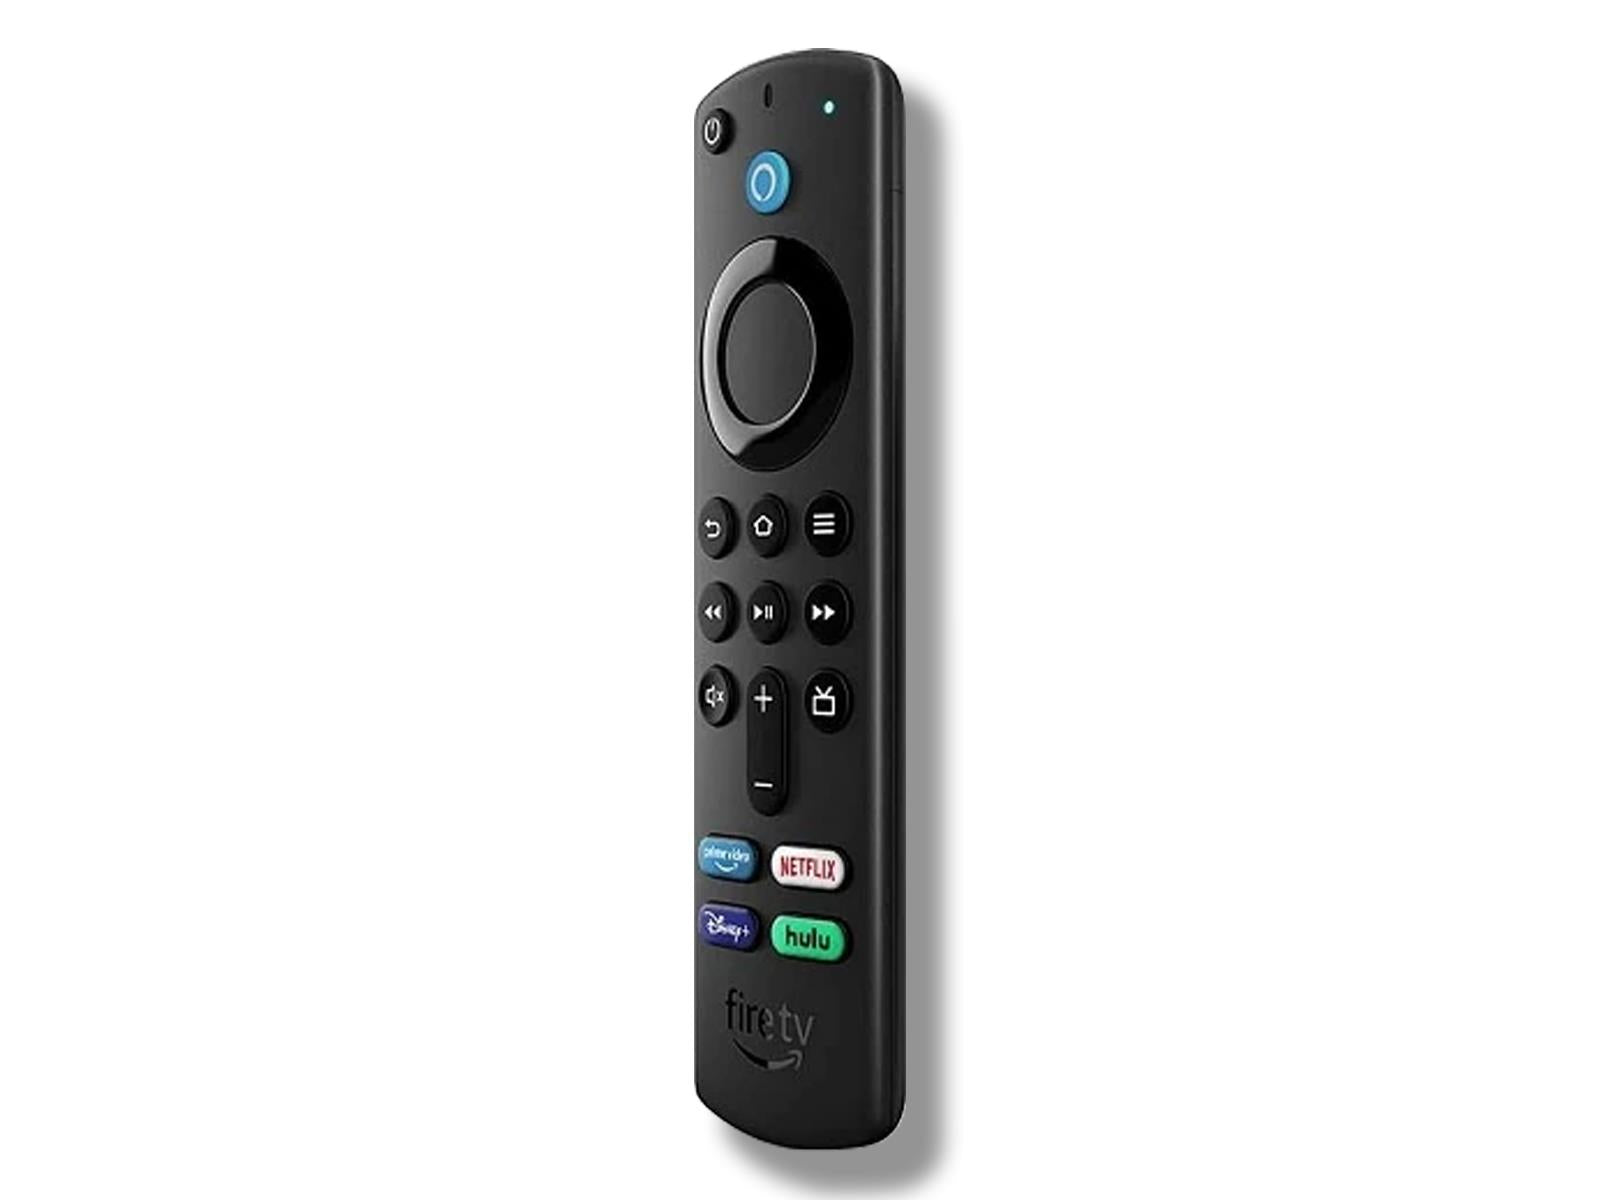 Image shows an angled side view of the Fire TV Stick Replacement Remote Control with Alexa Voice Control